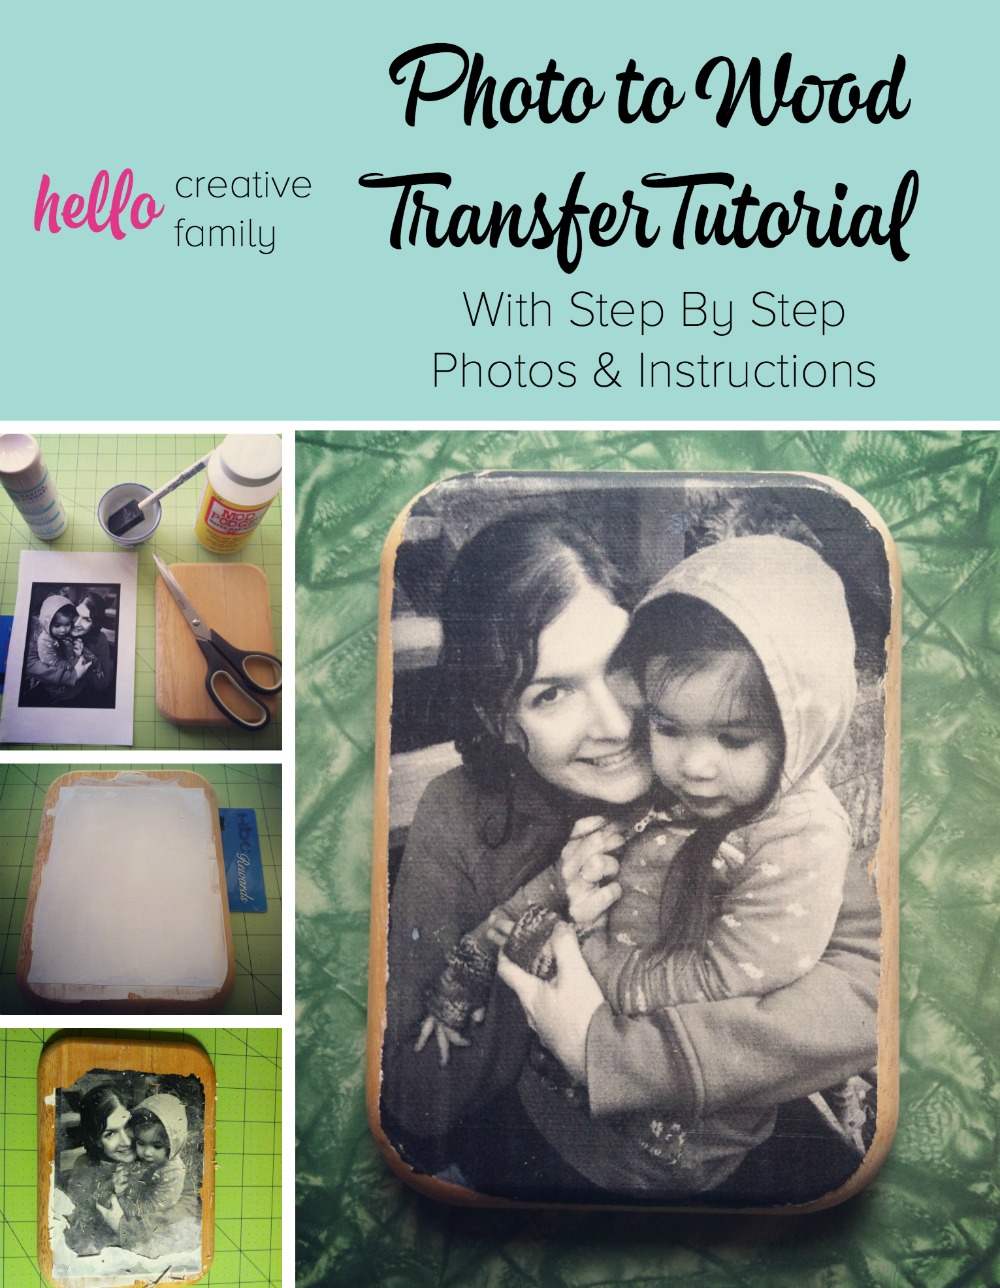 Photo to Wood Transfer Tutorial With Step By Step Photos and Instructions To Make A One of a Kind Handmade Gift. Great for photography lovers!